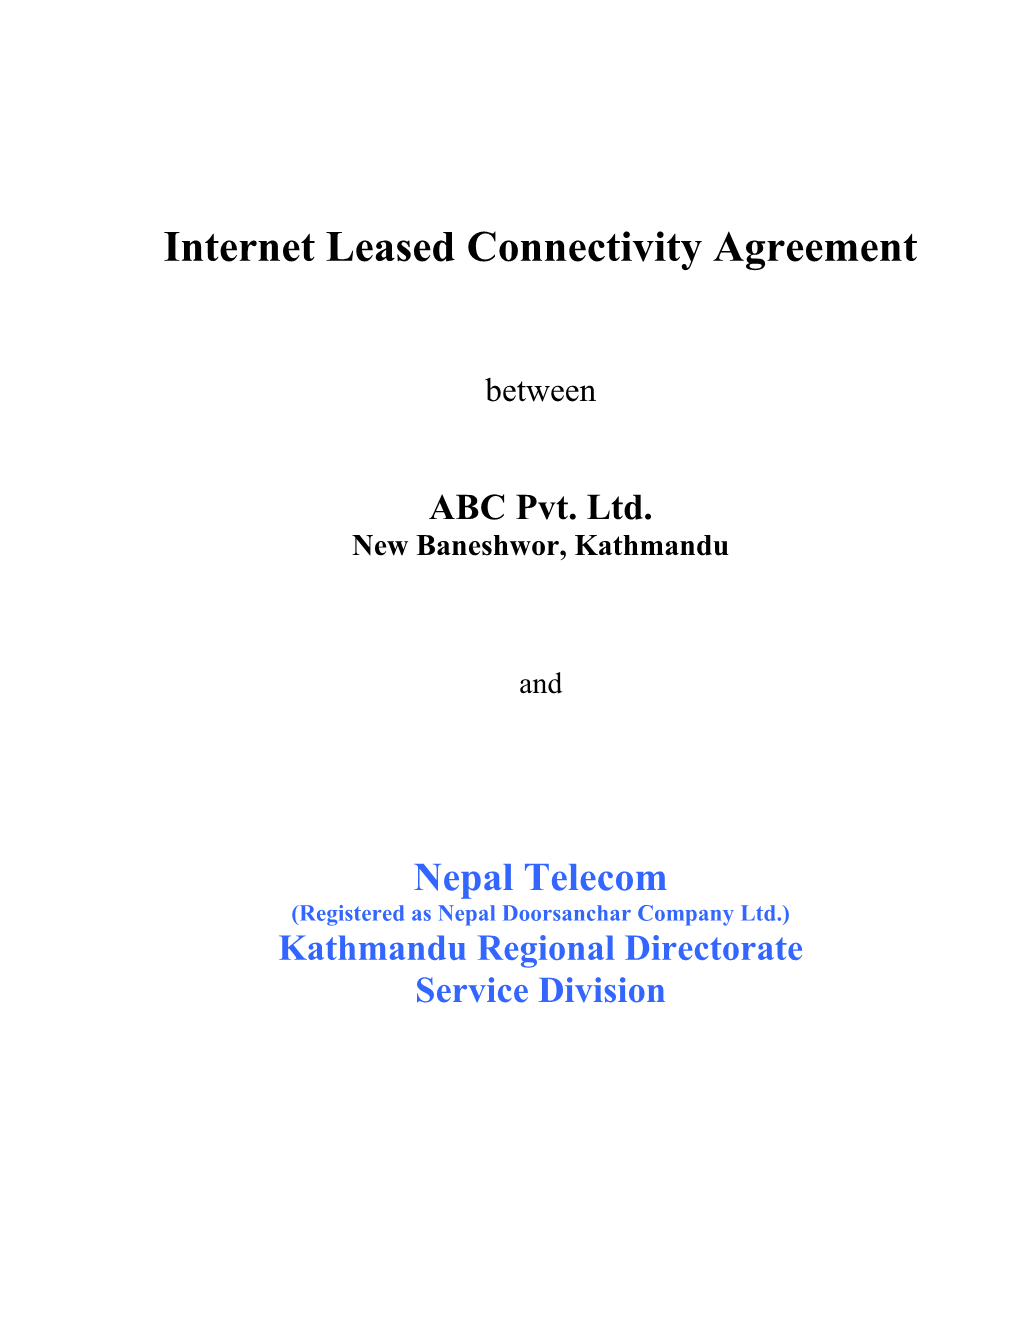 Internet Leased Connectivity Contract